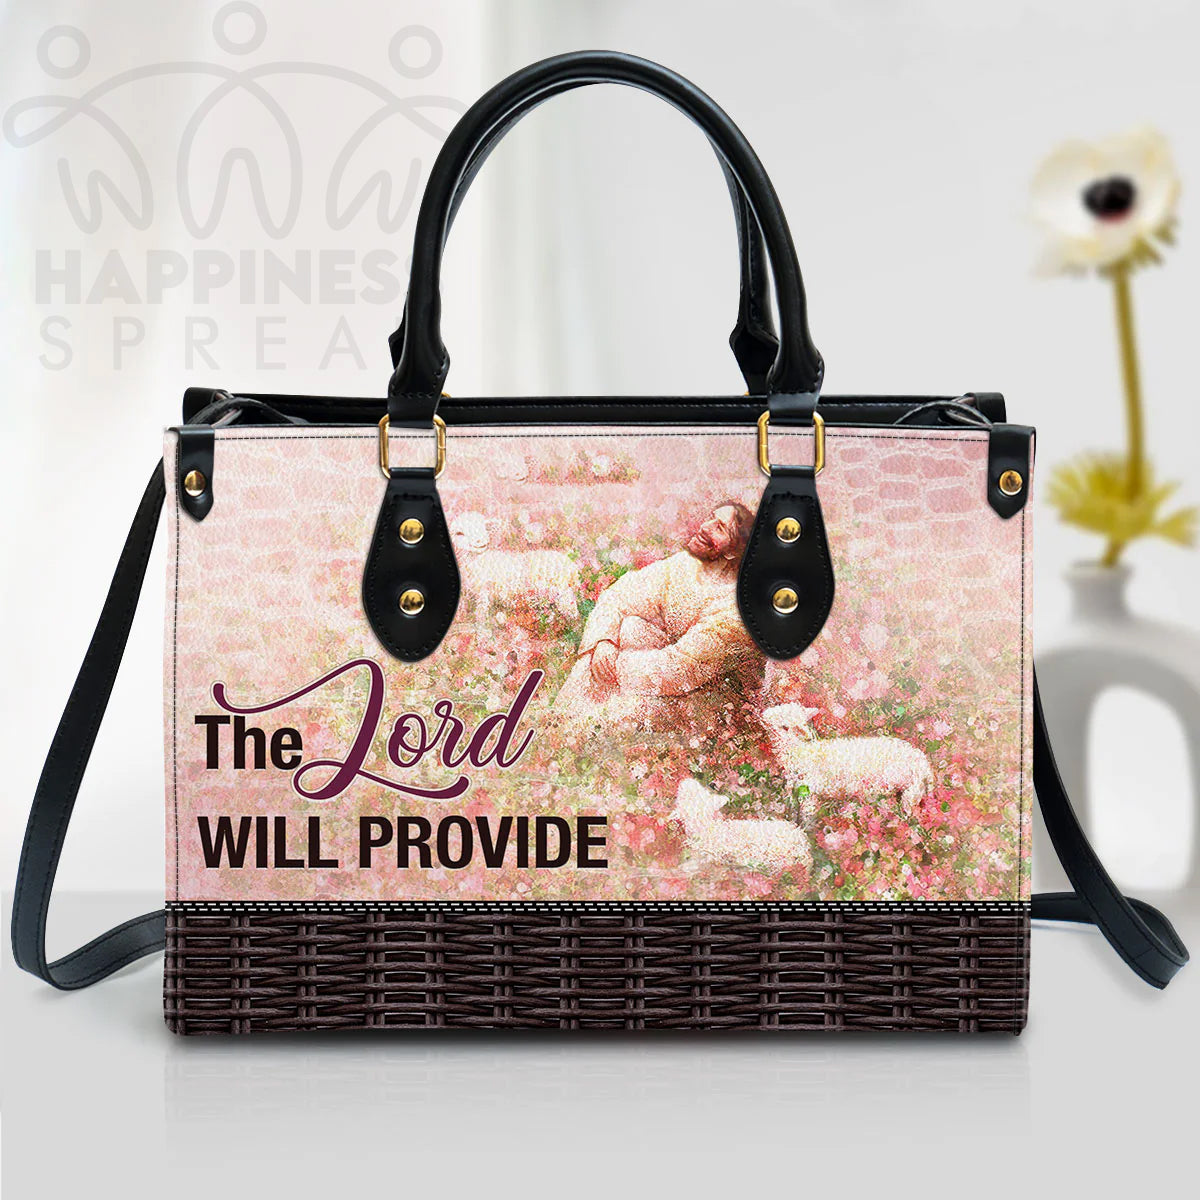 Christianart Handbag, Personalized Hand Bag, The Lord Will Provide, Personalized Gifts, Gifts for Women. - Christian Art Bag